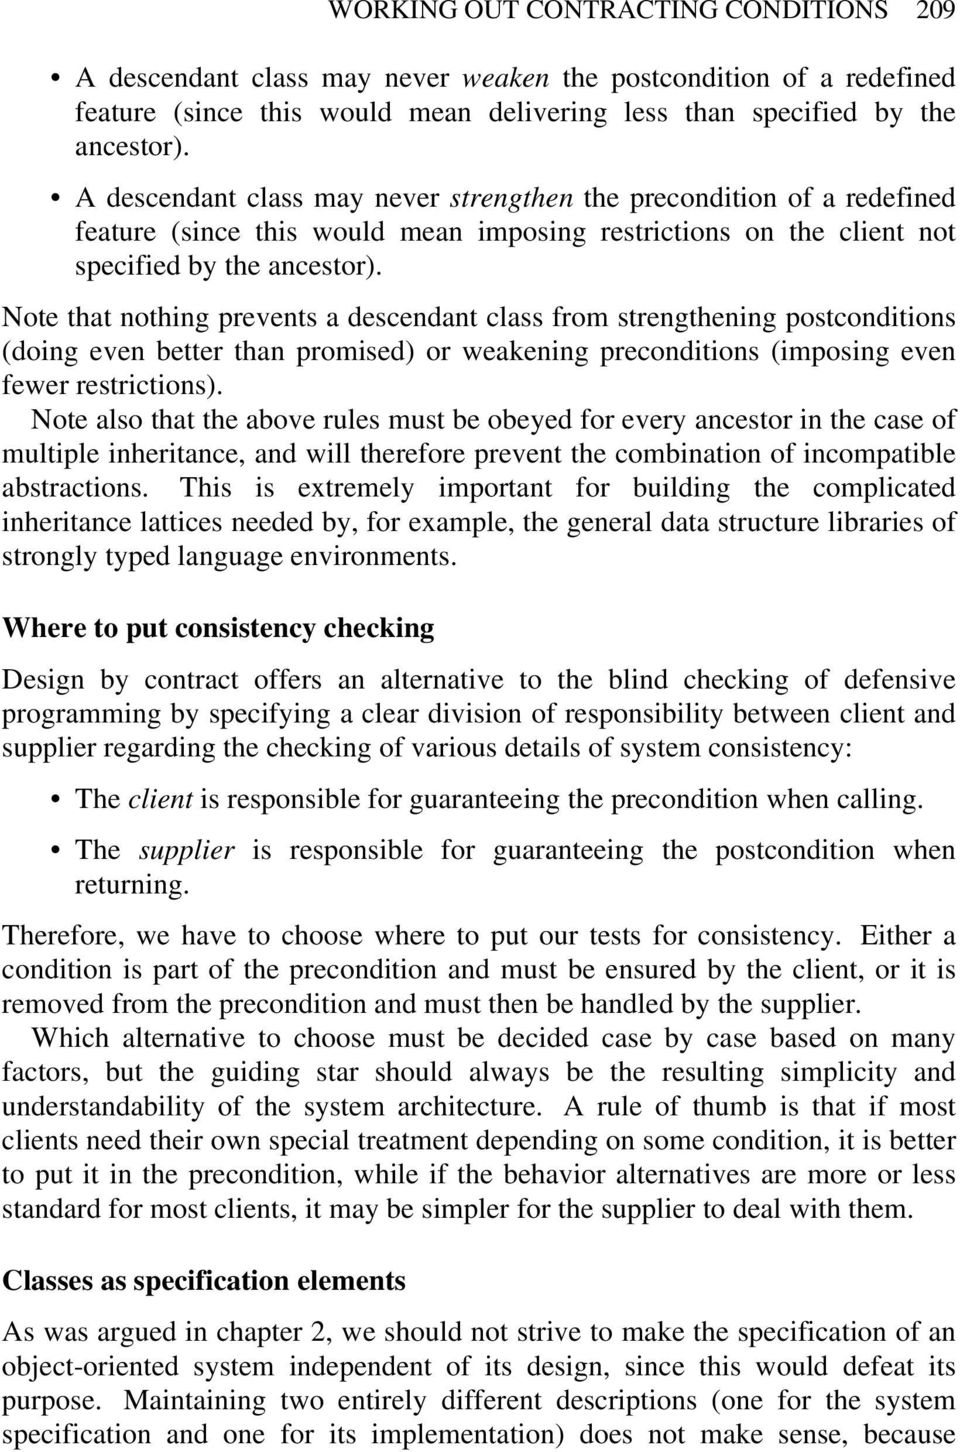 Note that nothing prevents a descant class from strengthening postconditions (doing even better than promised) or weakening preconditions (imposing even fewer restrictions).